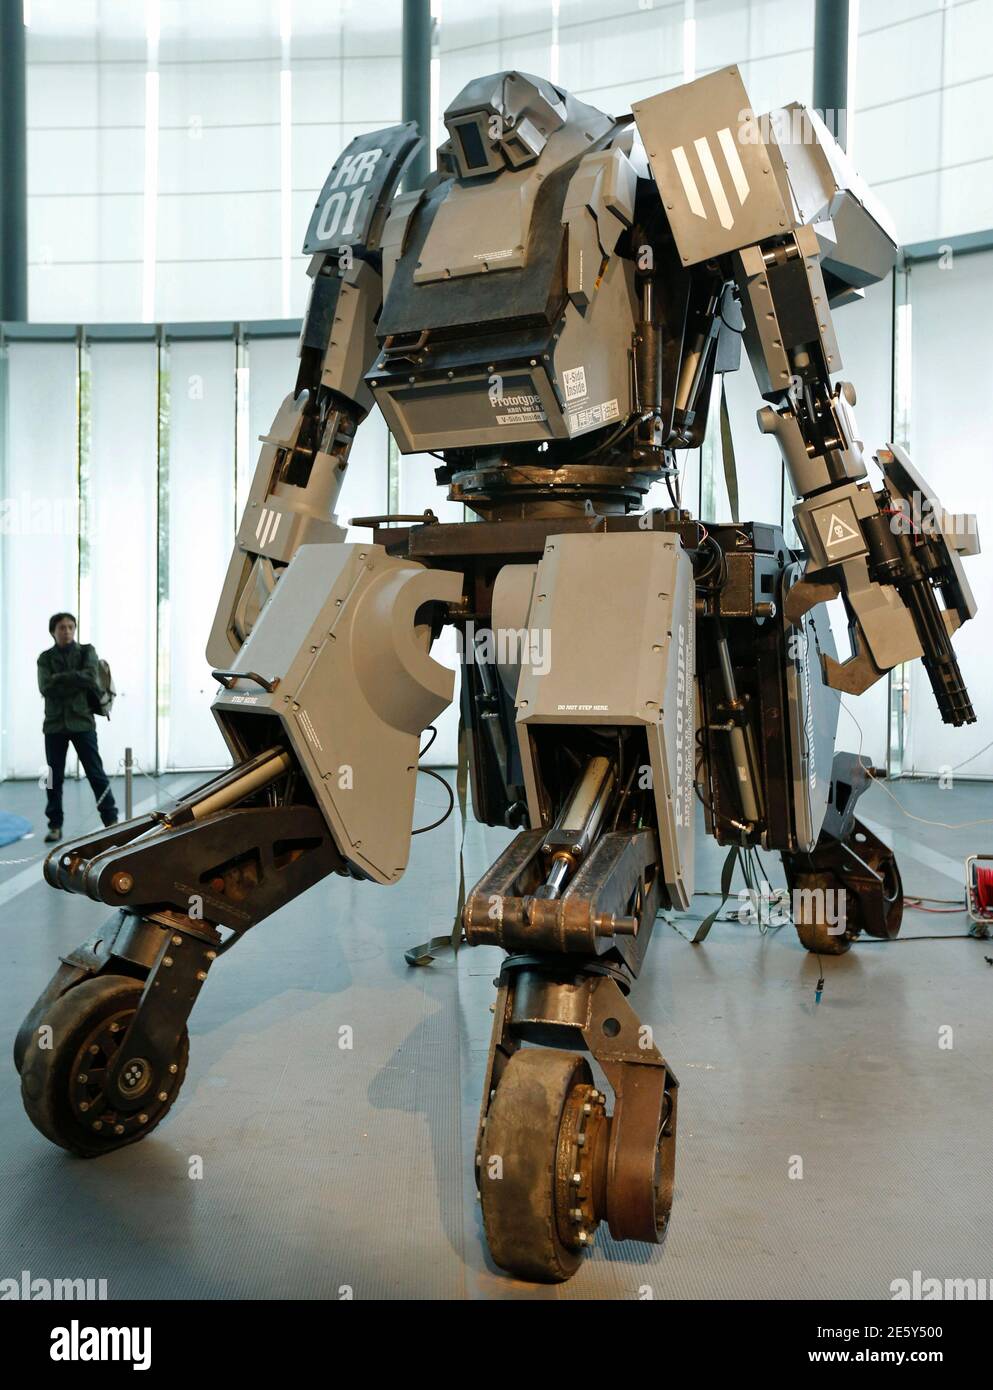 A man looks at a giant "Kuratas" robot at an exhibition in Tokyo November  28, 2012. The four-meter-high, limited edition, made-to-order robot is  controlled through a pilot in its cockpit, or via